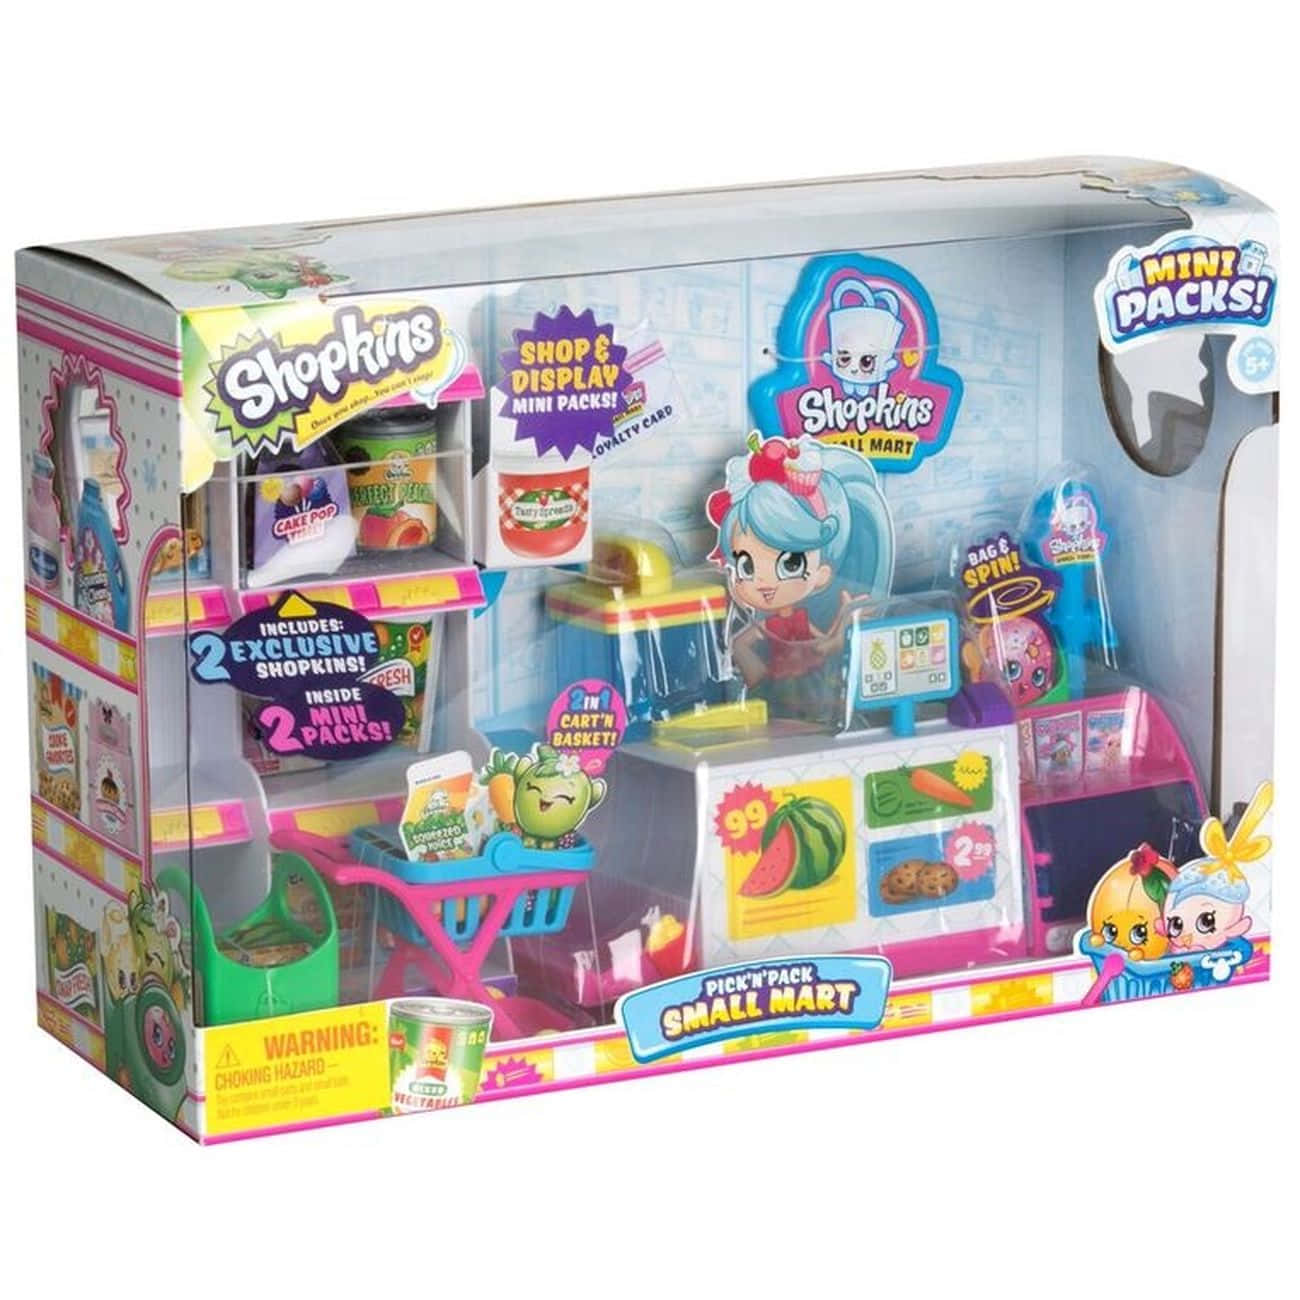 Caption: Adorable Shopkins Characters Collection